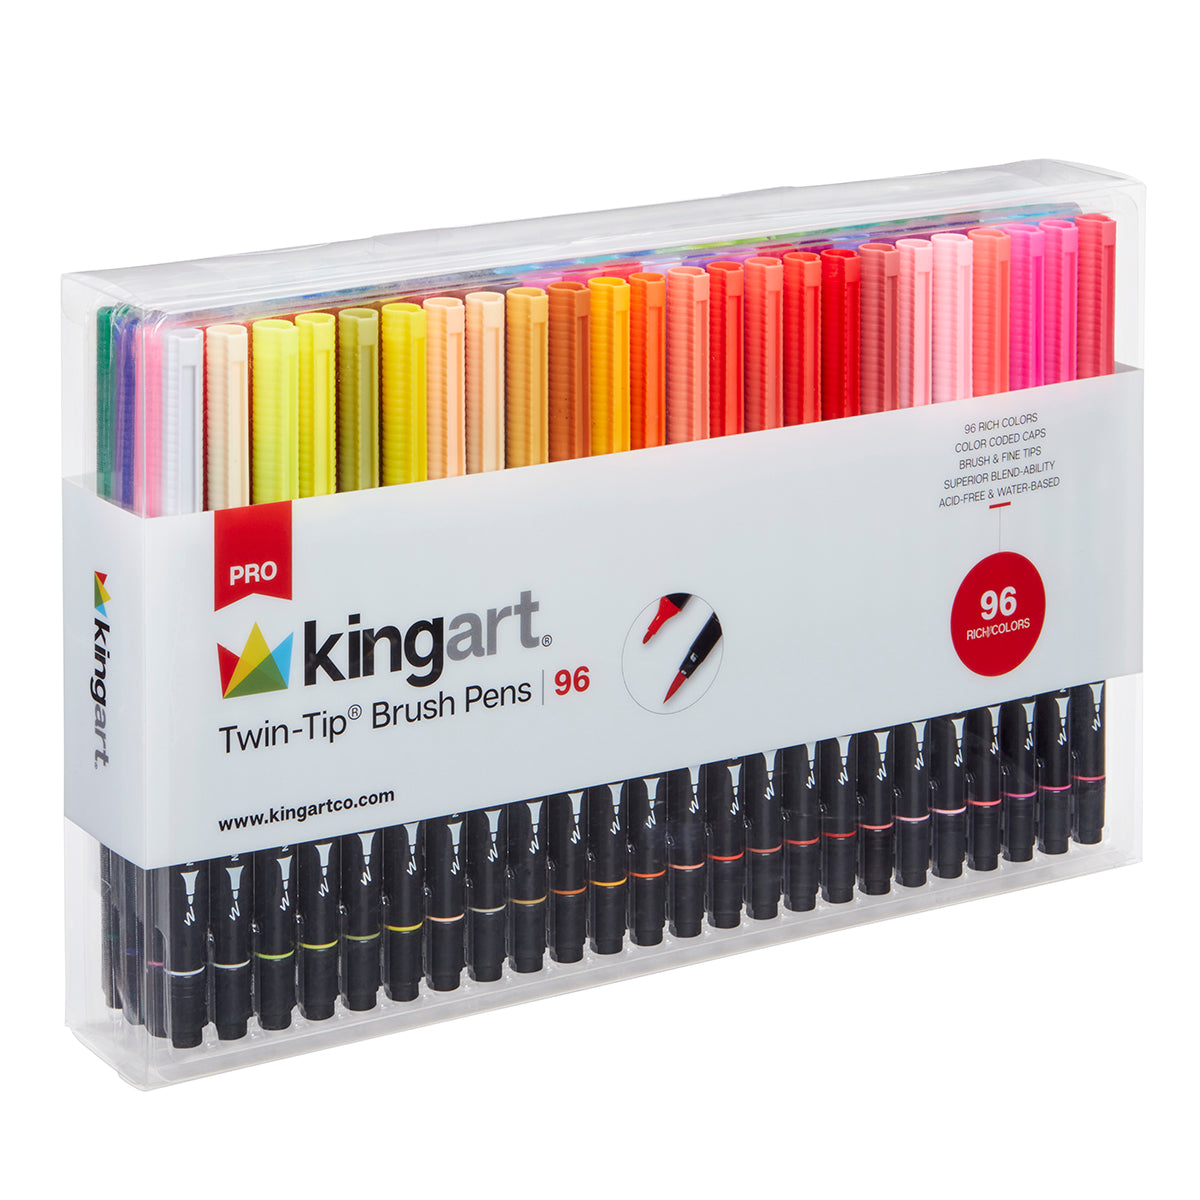  KINGART 400-30 Glitter Rollerball Gel Pens, 30 Sparkling Colors  with Soft-Grip Comfort, XL Ink Cartridge - More Ink, Great for All Ages,  Writing, Coloring, Doodling, Scrapbooking, Journaling & More